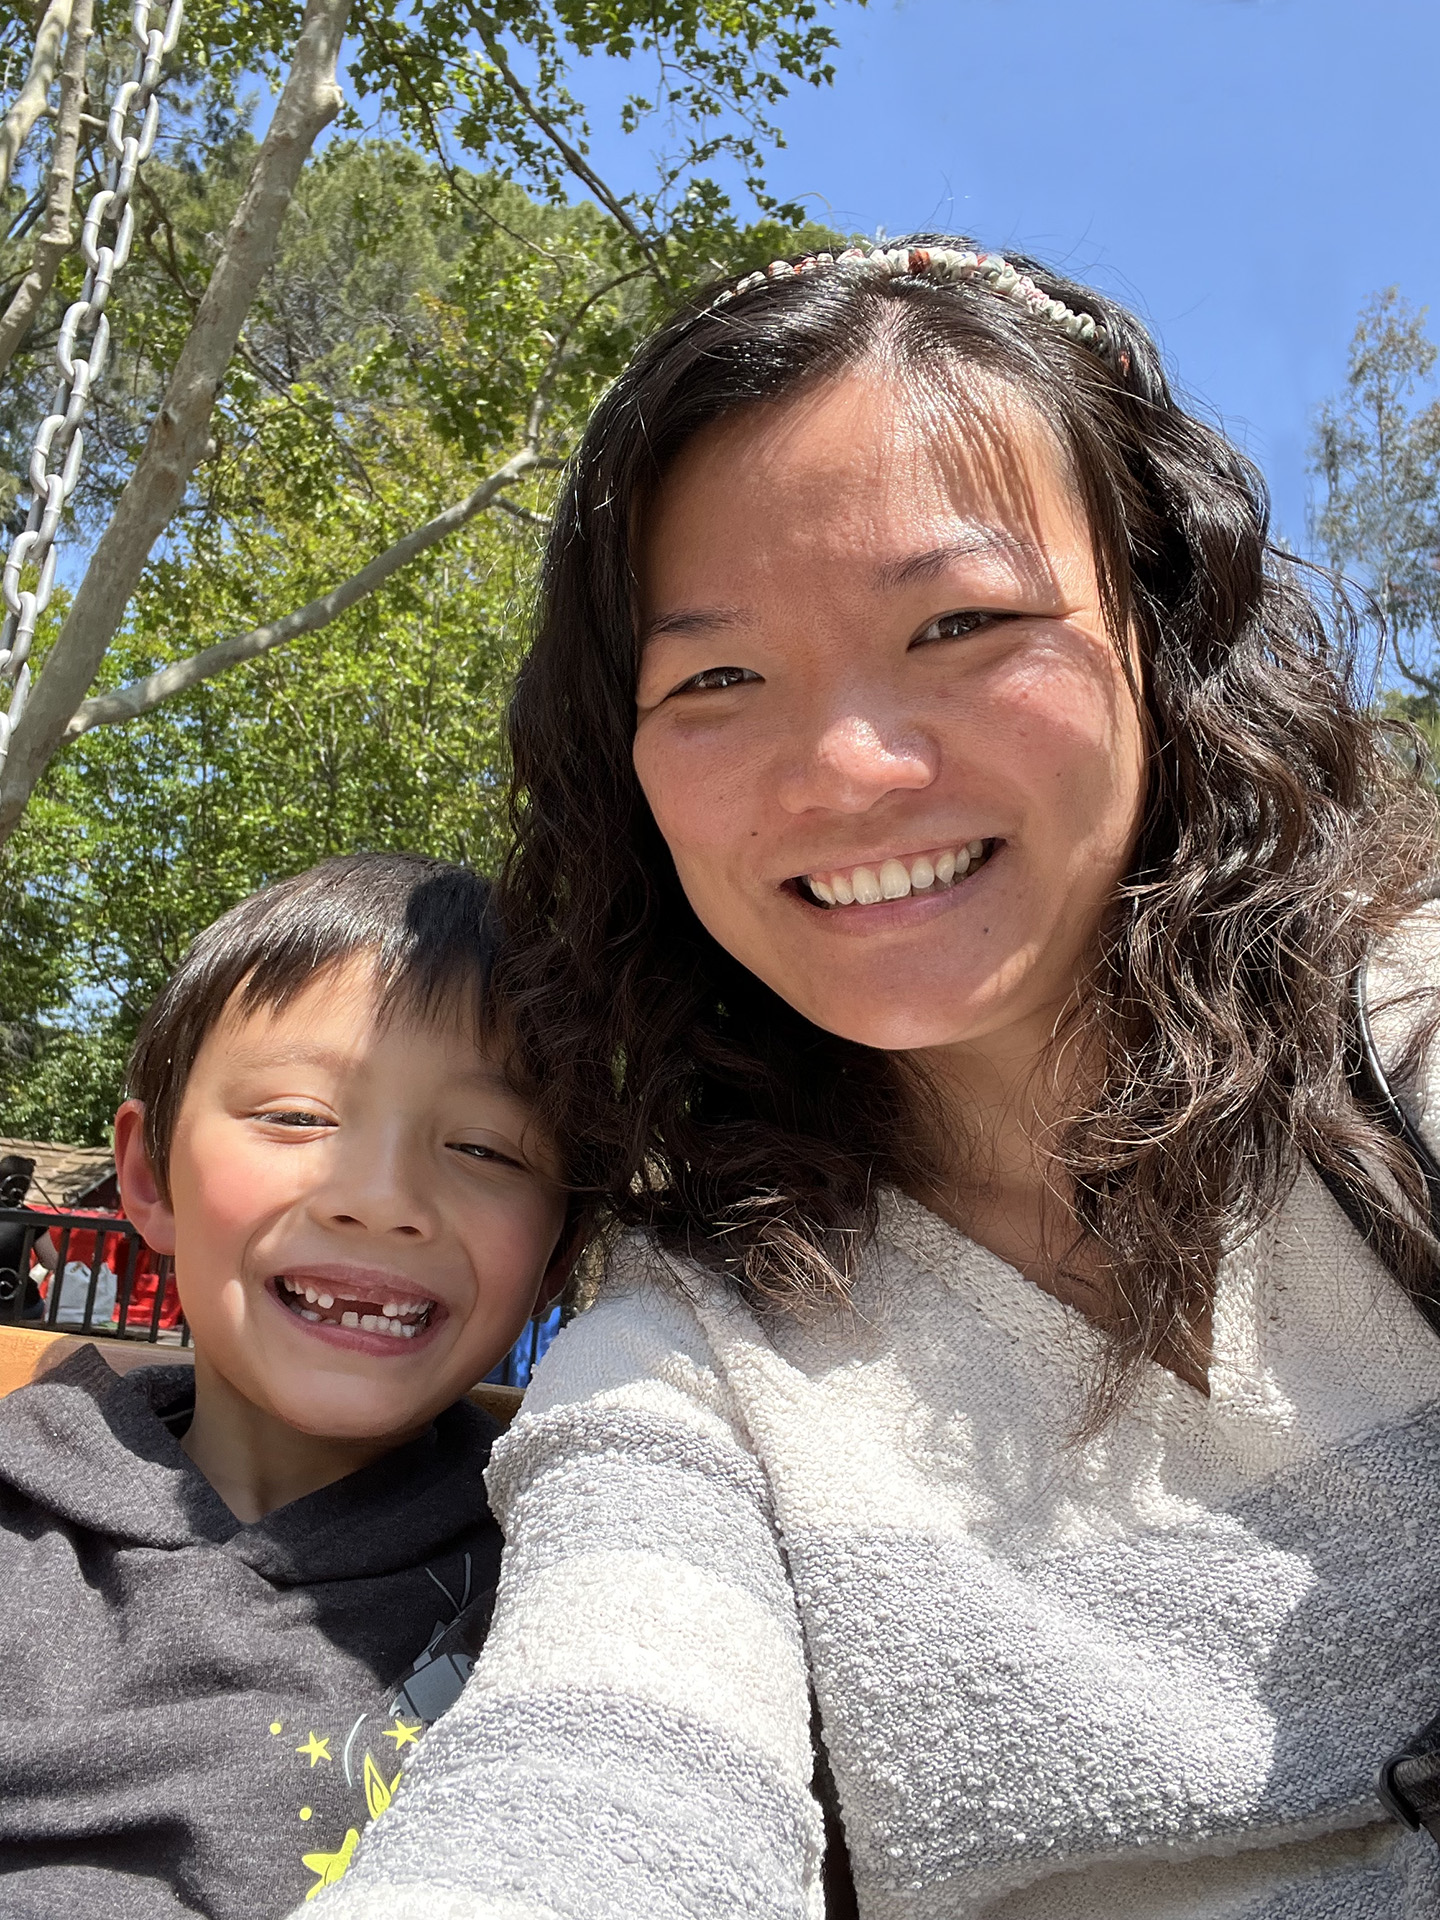 Sac State graduate Mikaela Huang and son Edoardo smile against the backdrop of a playground.